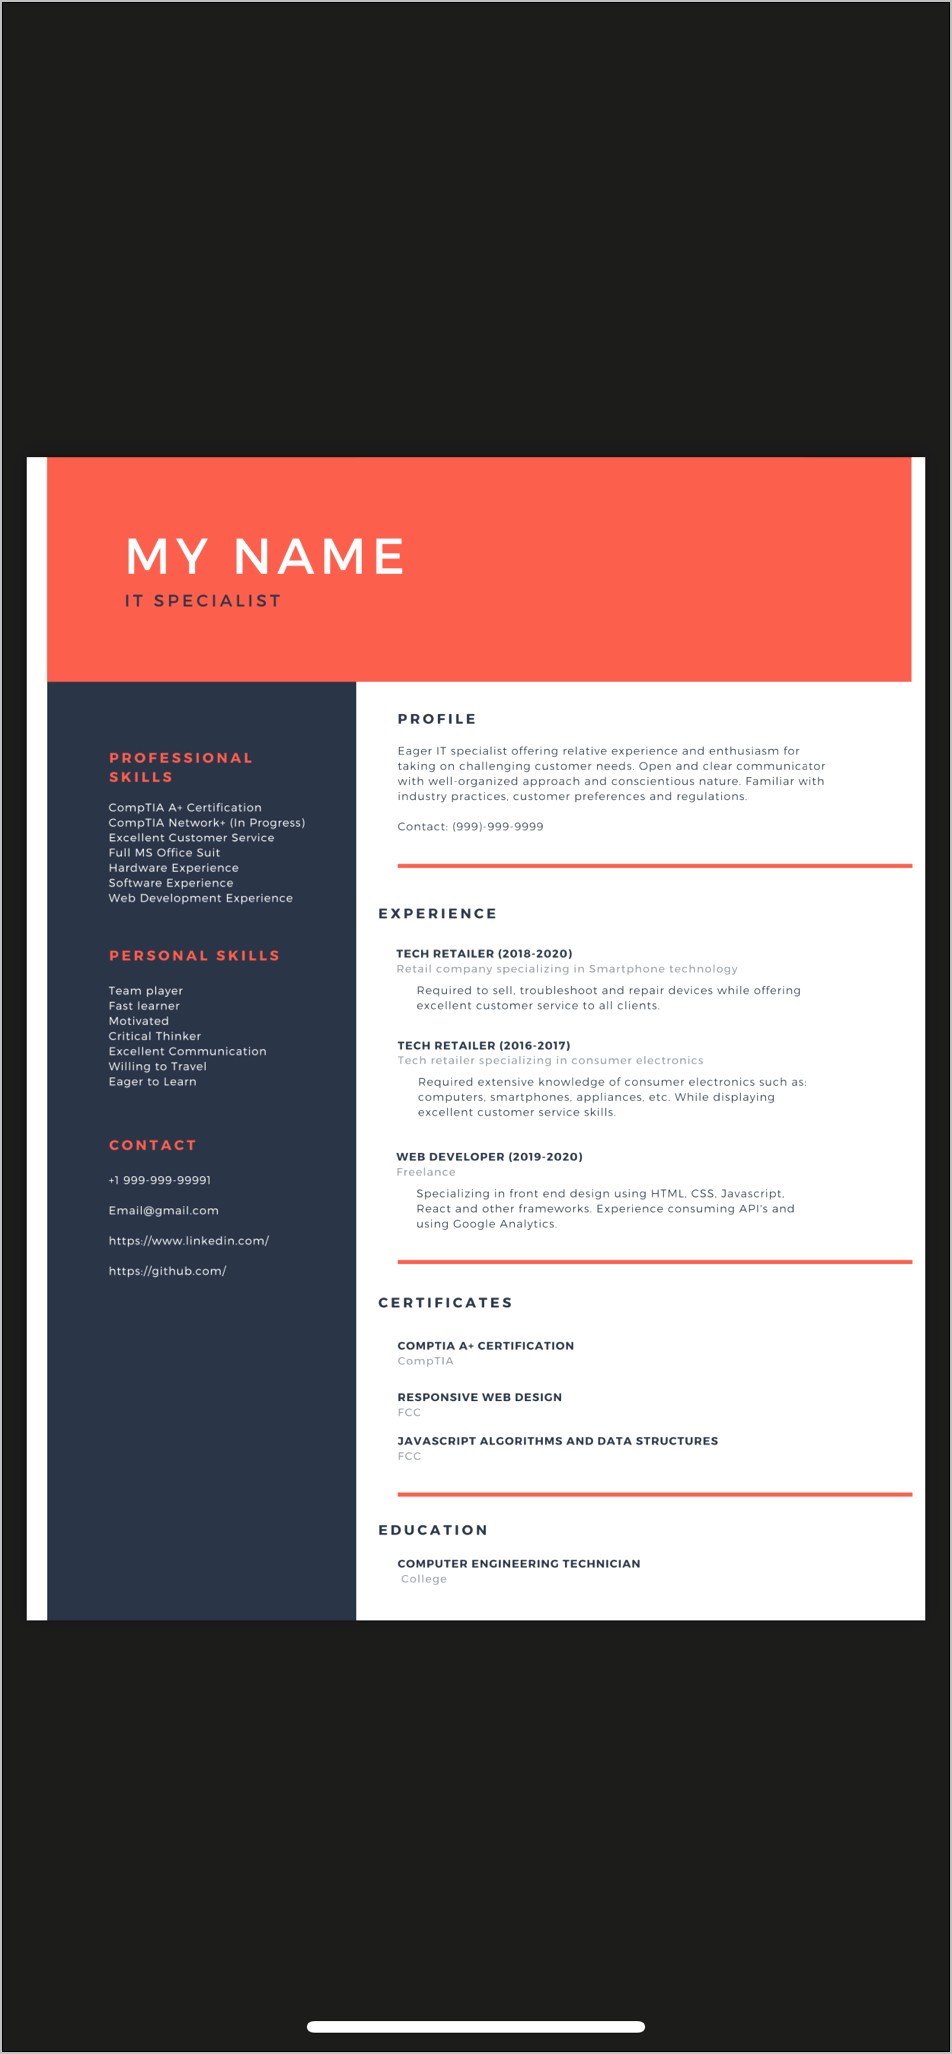 Is Conscientious Good On A Resume